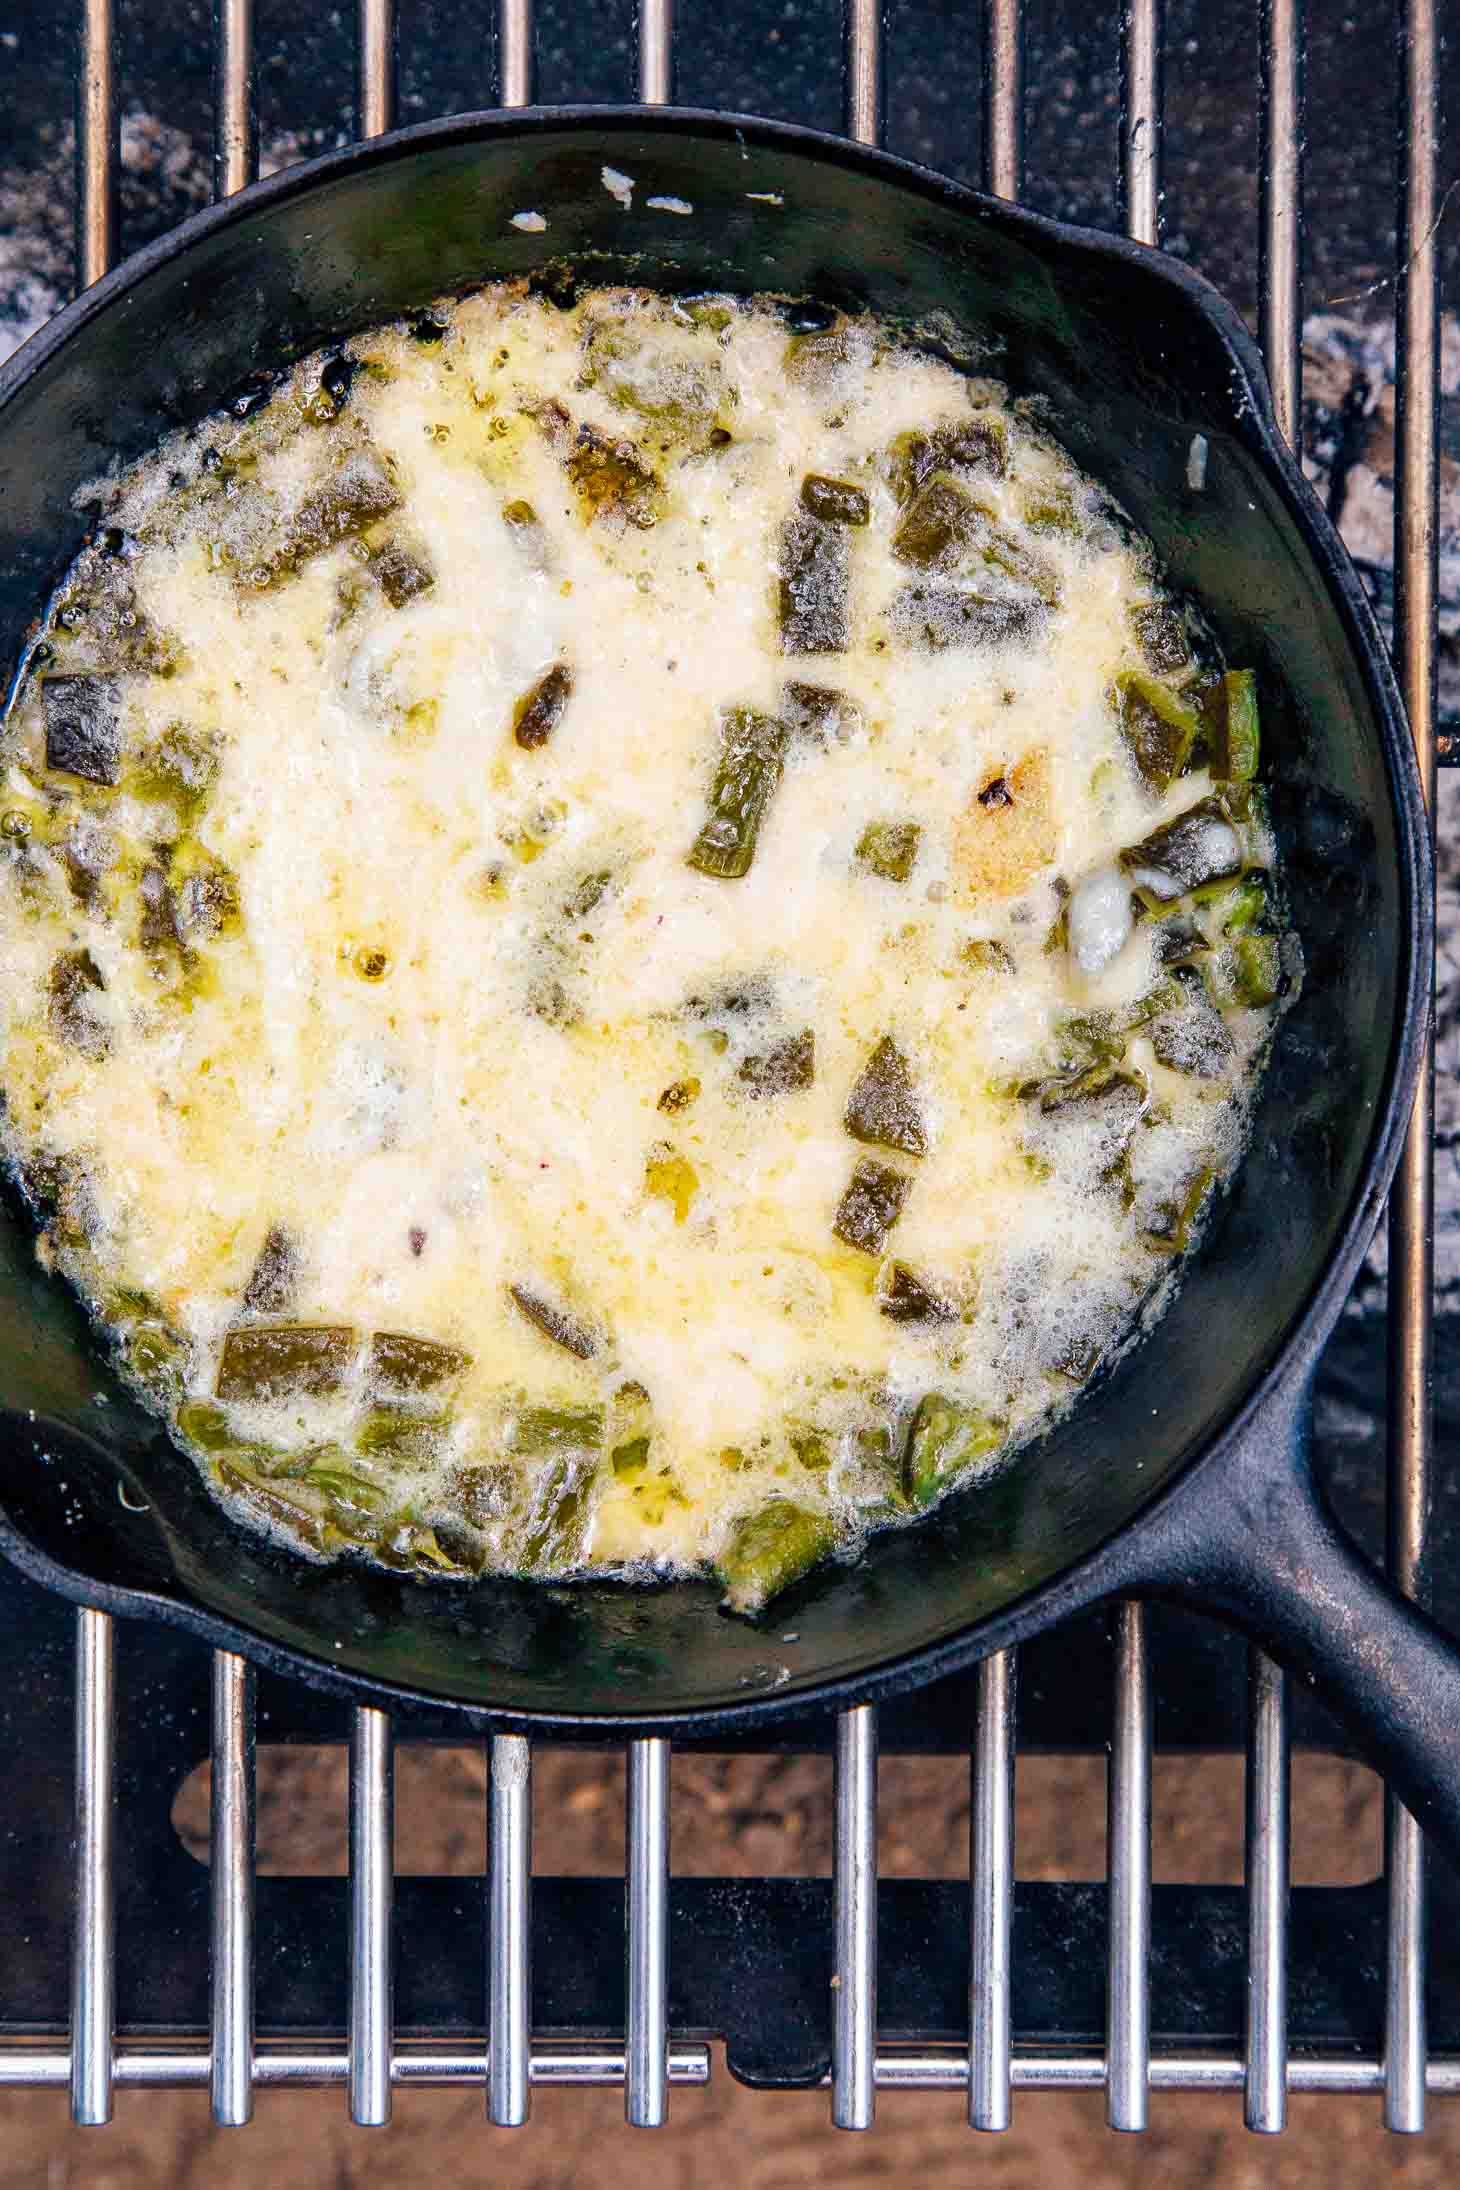 Queso fundido in a cast iron skillet on a campfire grill